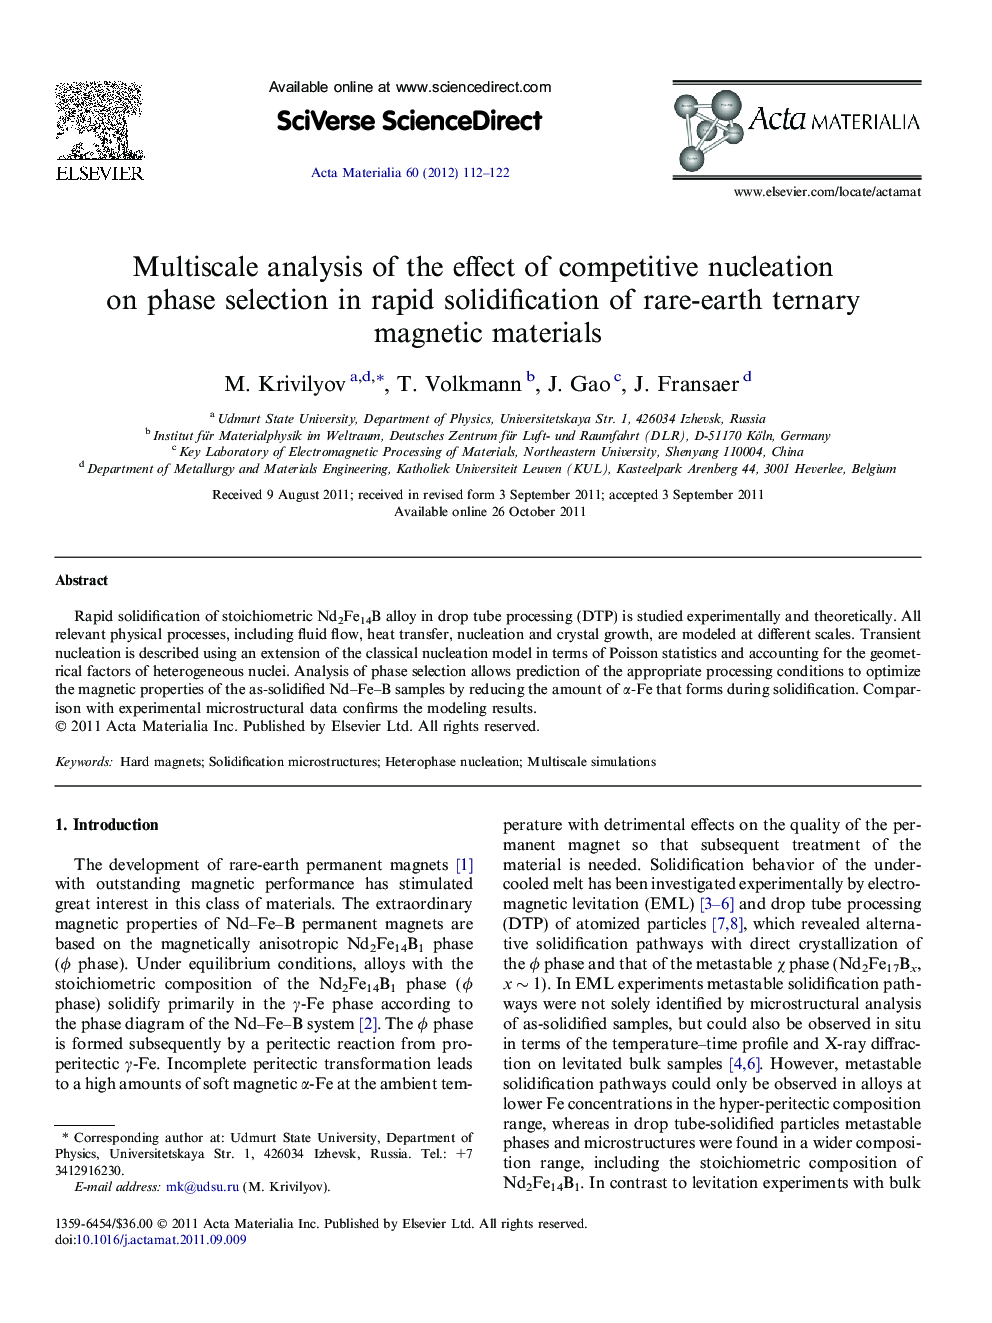 Multiscale analysis of the effect of competitive nucleation on phase selection in rapid solidification of rare-earth ternary magnetic materials